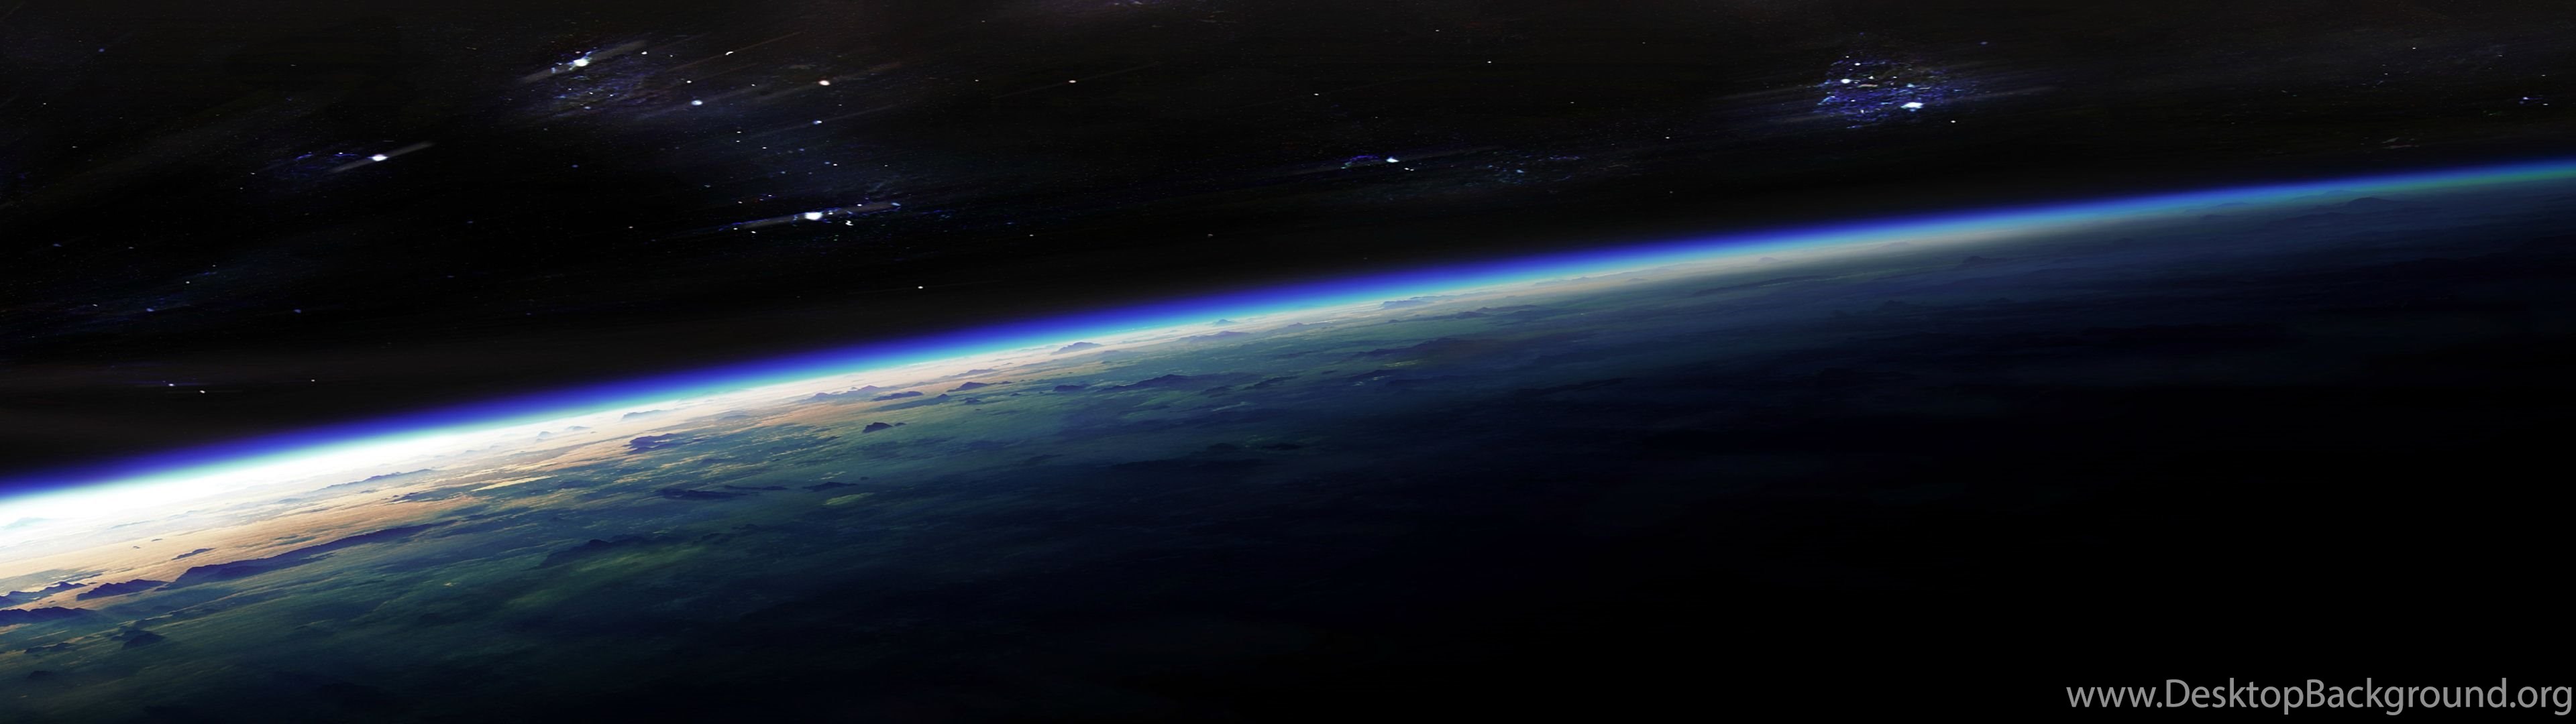 Download Curvature Of The Earth 5760x1080 : Threescreenwallpapers Widescree...